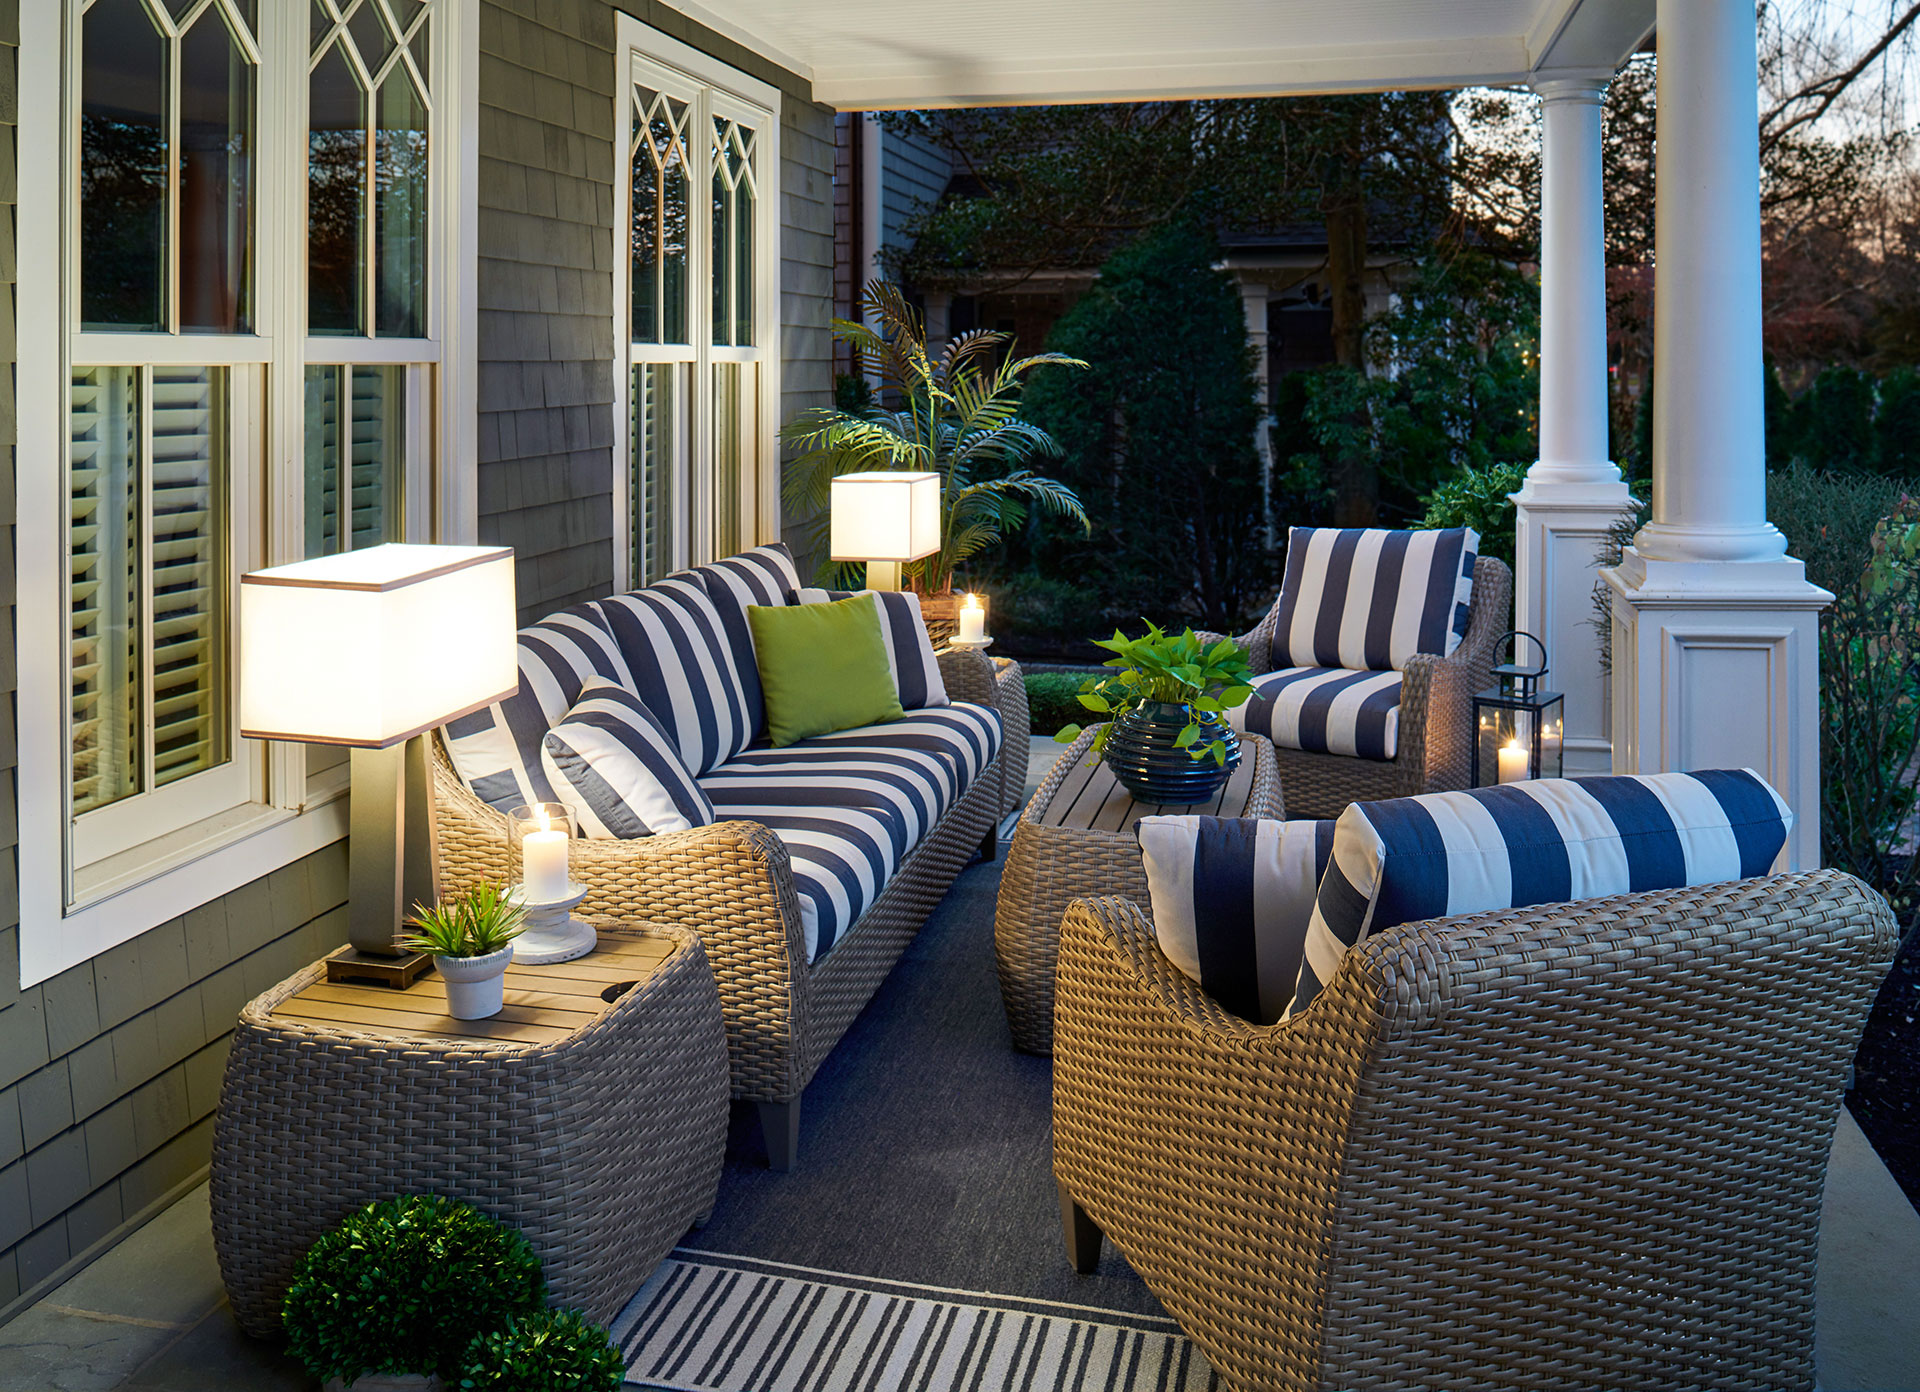 A photo of an outdoor living space with a comfortable sofa, a table, and two chairs surrounded by greenery.